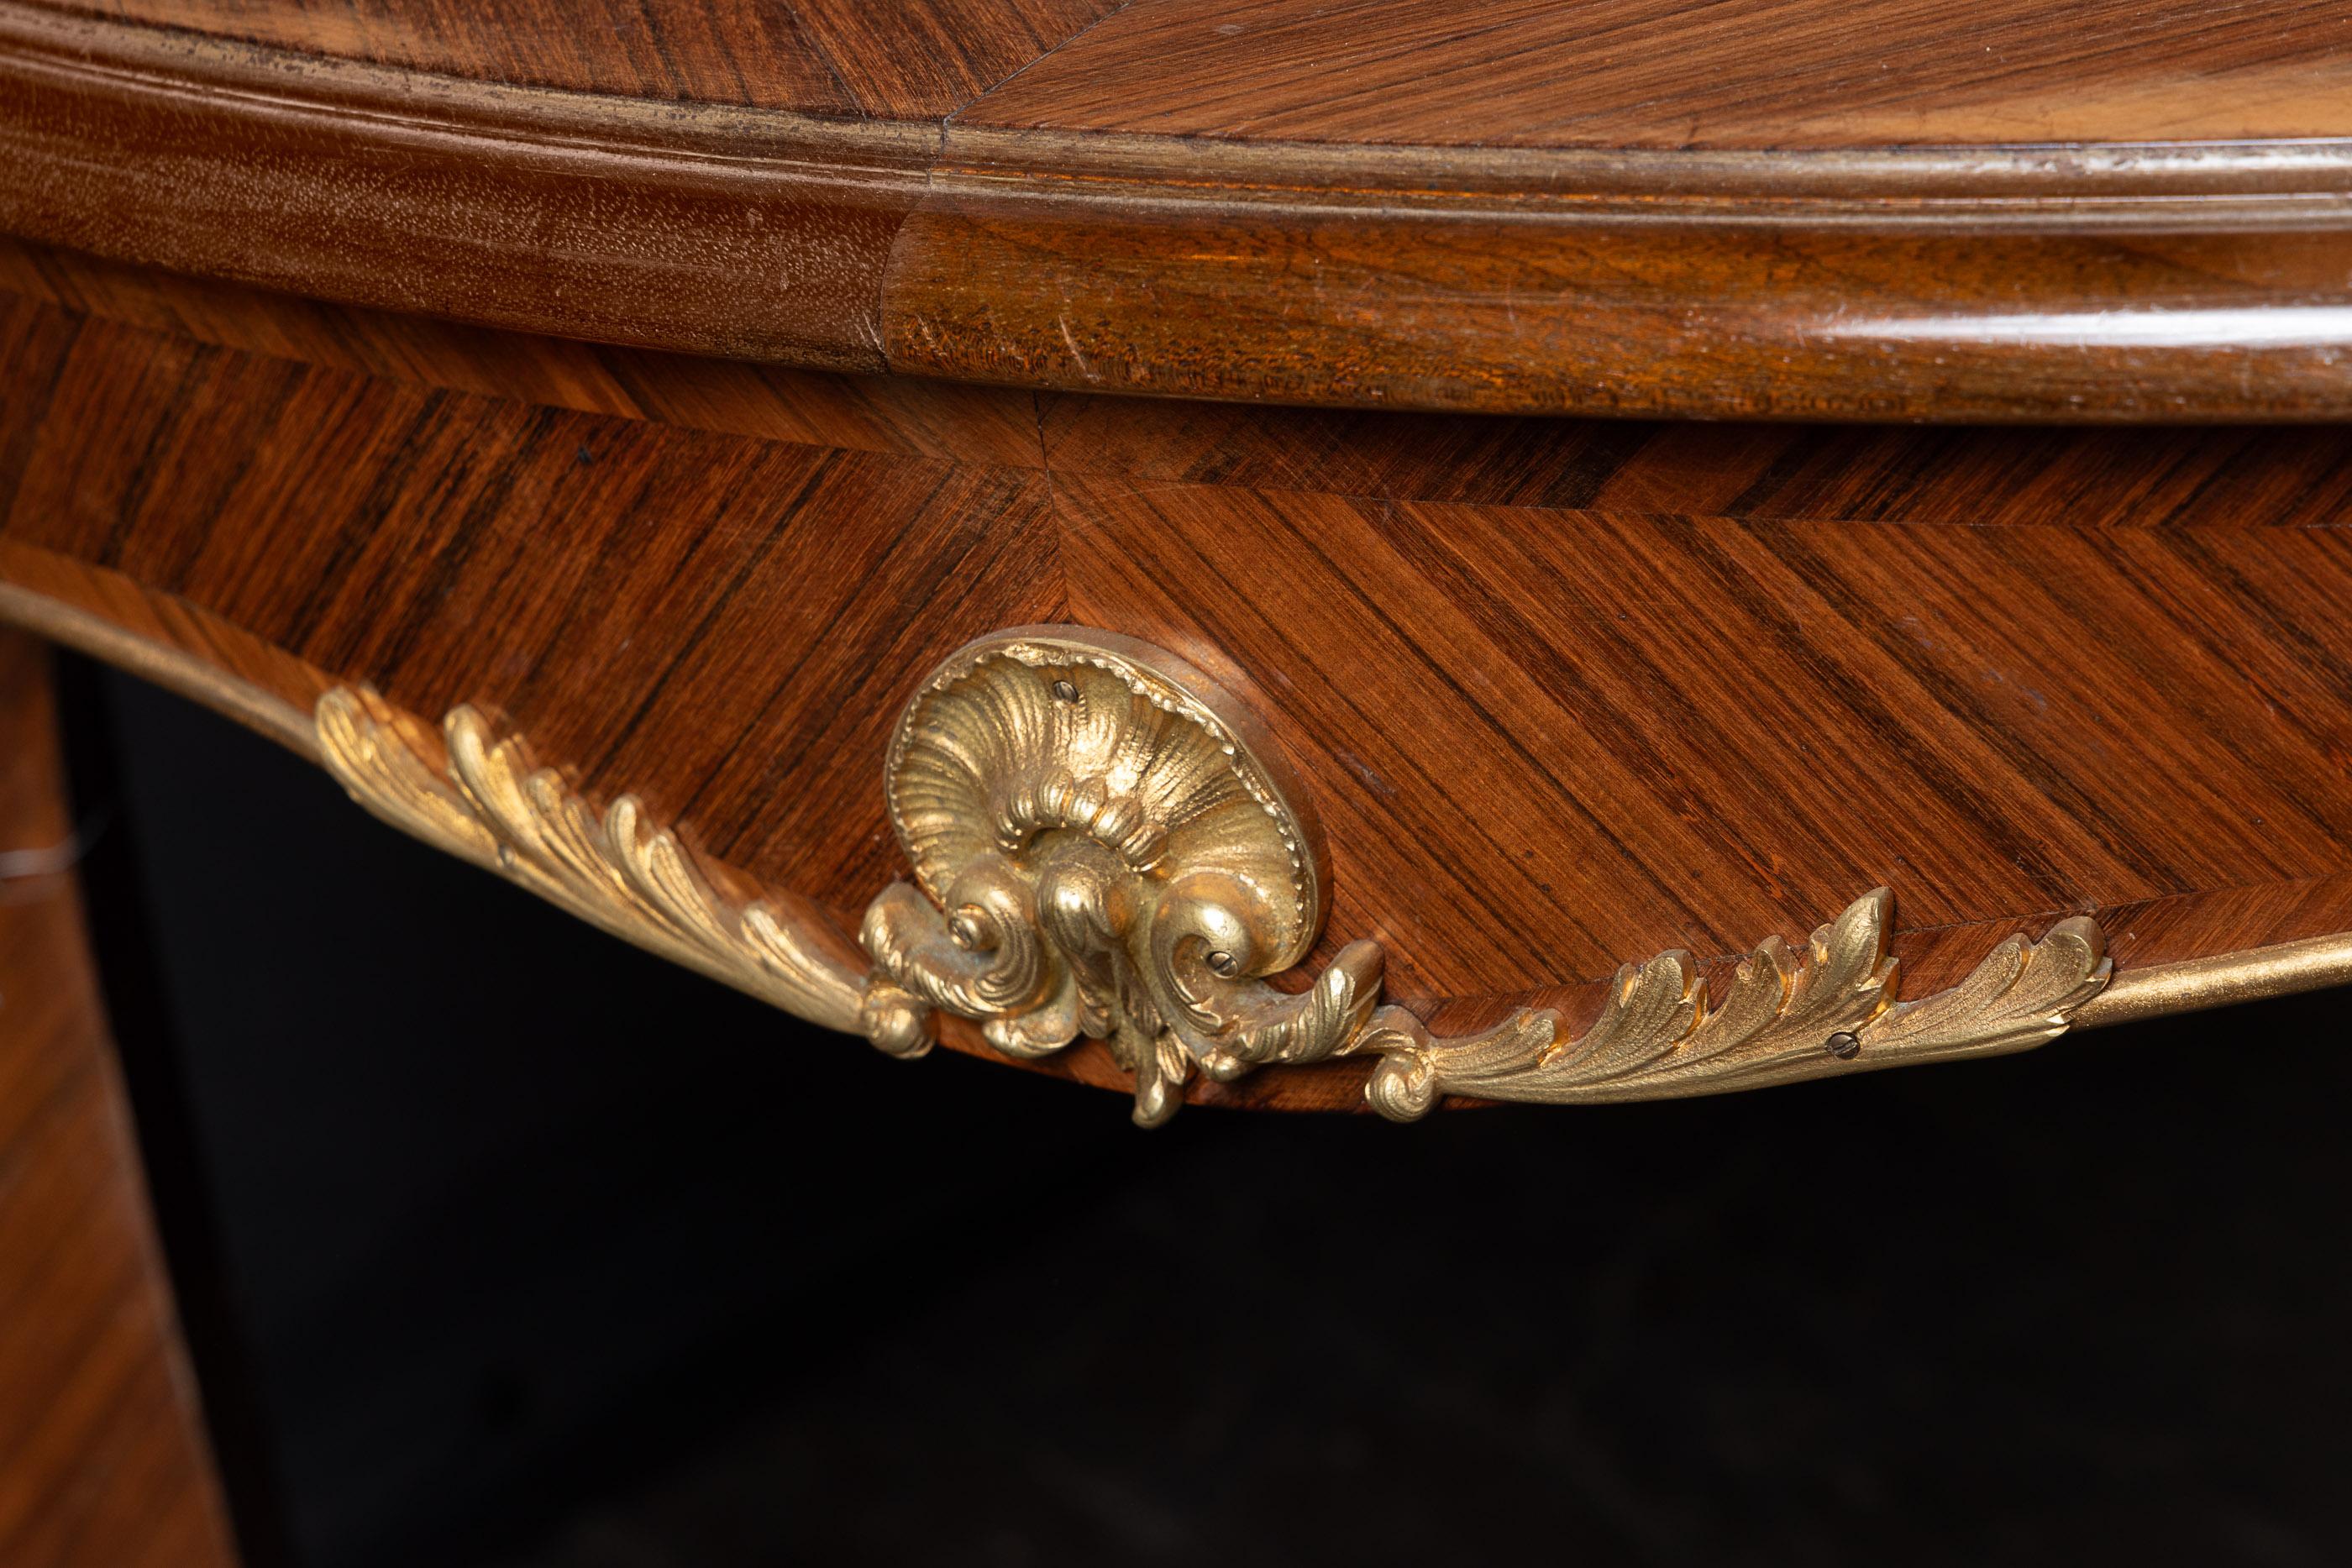 Beautiful French 19th century marquetry dining table. The piece is a fine example of the Louis XV style. It sports detailed bronze d'ore mounts and one matching marquetry leaf. The piece features its original top which will need to be refinished. If